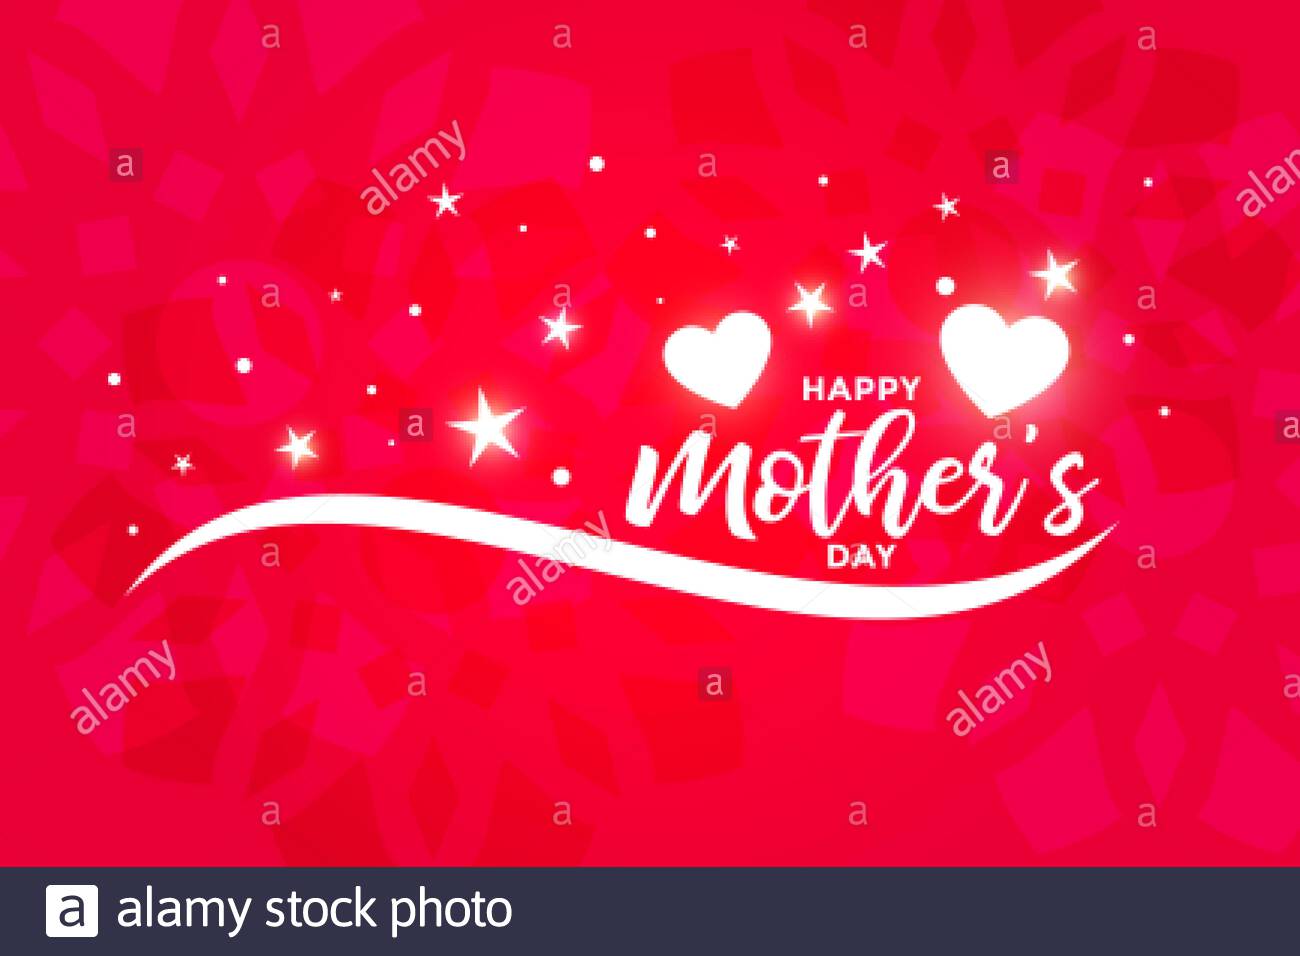 Beautiful Happy Mothers Day Greeting Or Wallpaper Design Stock